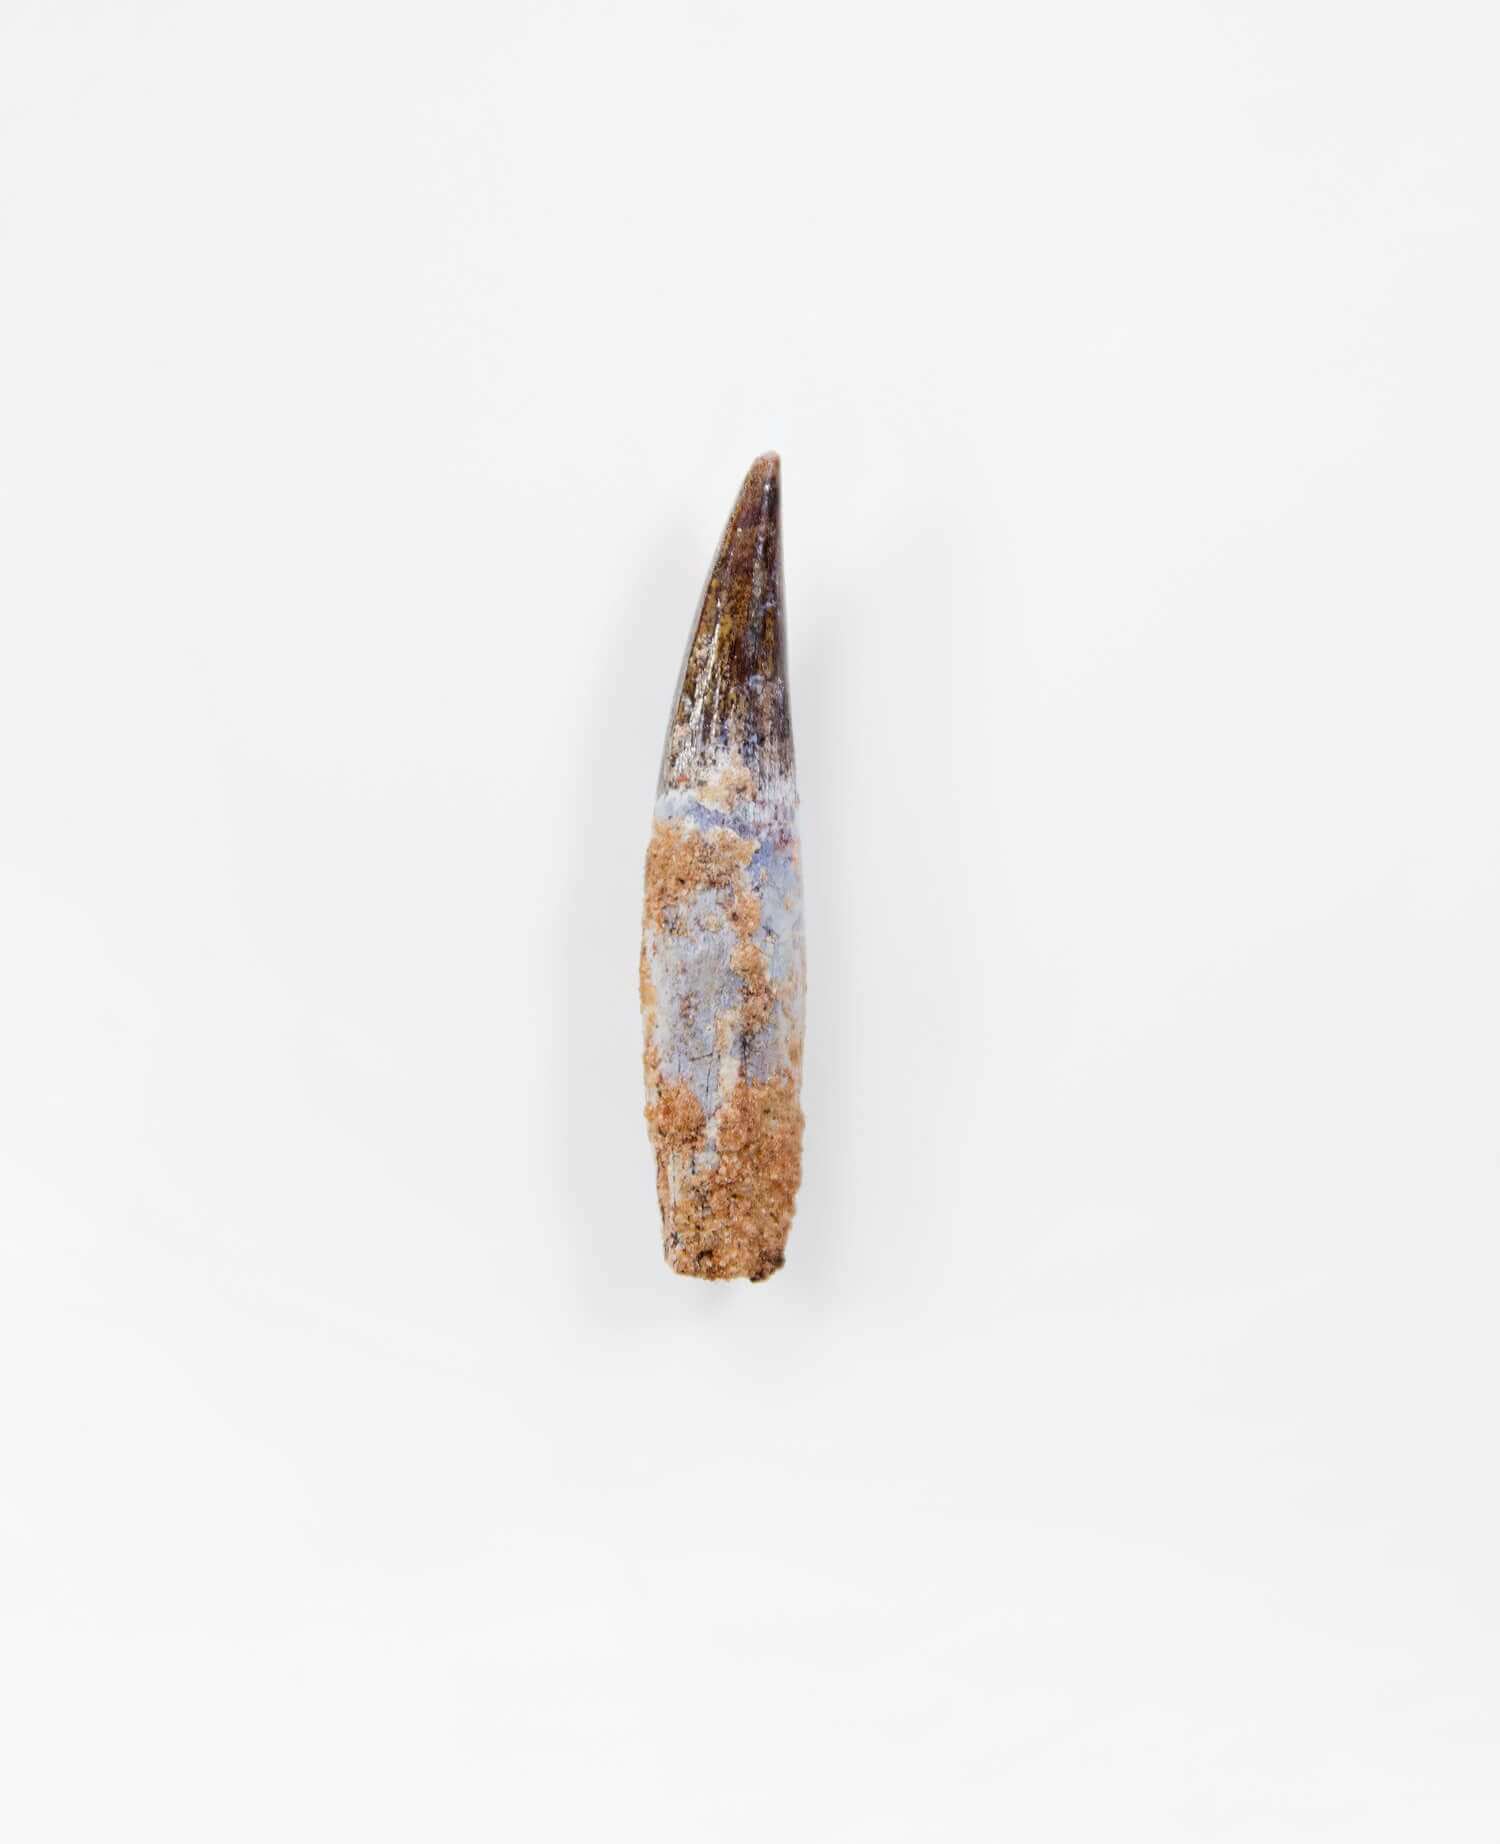 Scientifically important Spinosaurus aegyptiacus dinosaur fossil tooth for sale measuring 48mm at THE FOSSIL STORE